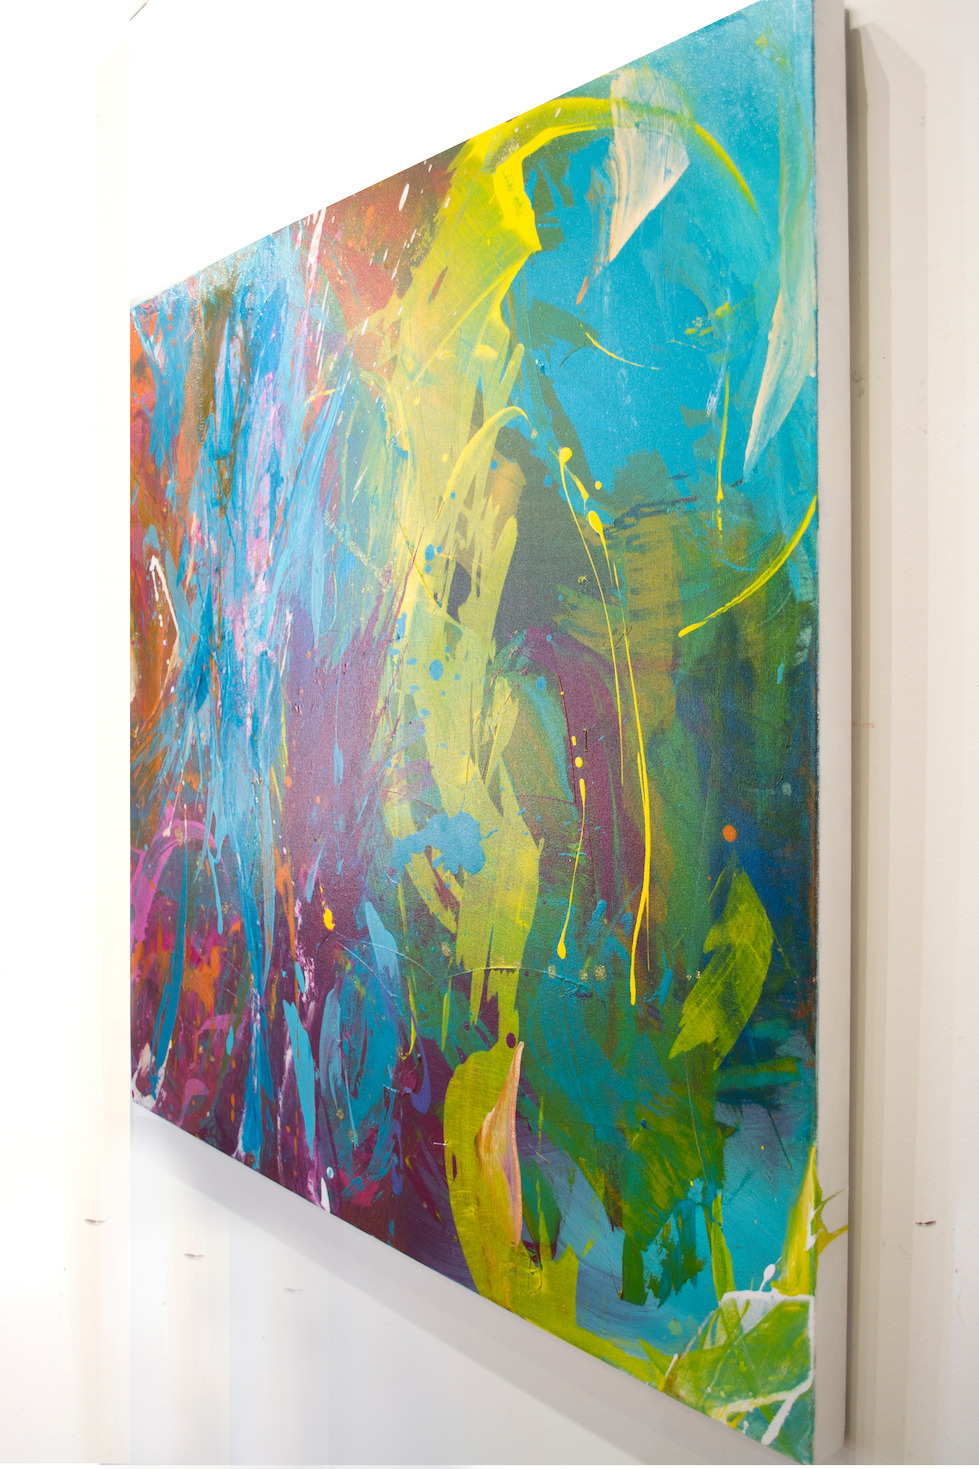 Side View Of Abstract Painting "In The Clouds" By Judith Dalozzo